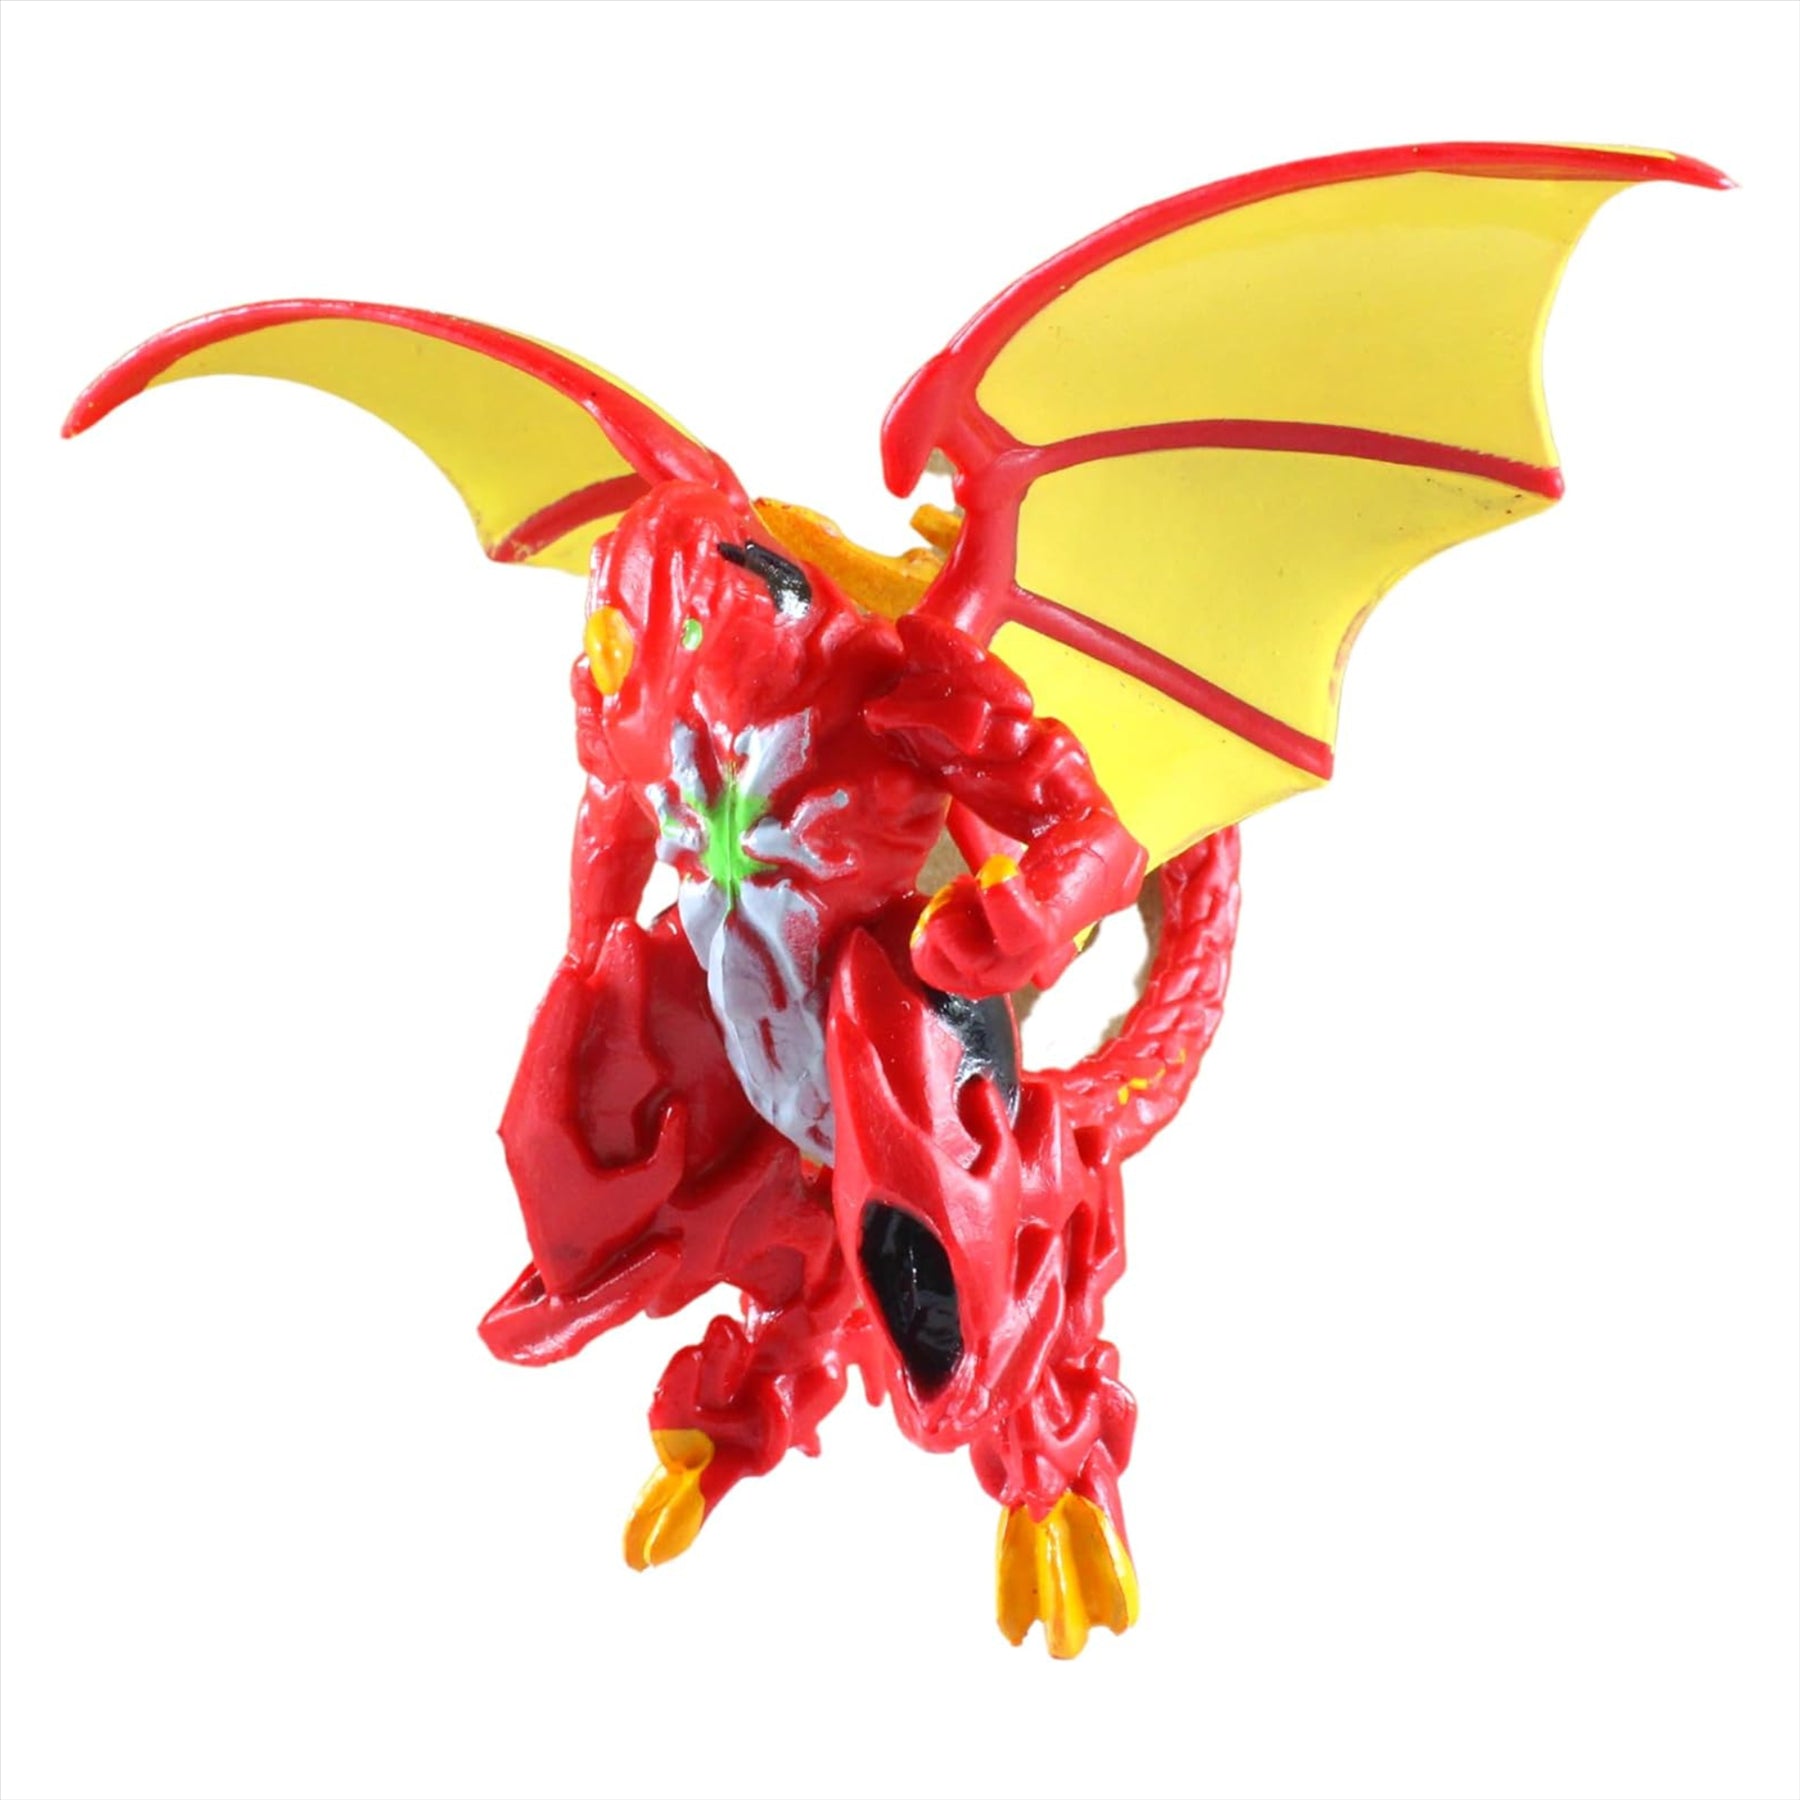 Bakugan - Deluxe Collector Figure Bundle With 2x Cards & Coin In Each Pack - 4 Pack - Set 1 - Toptoys2u